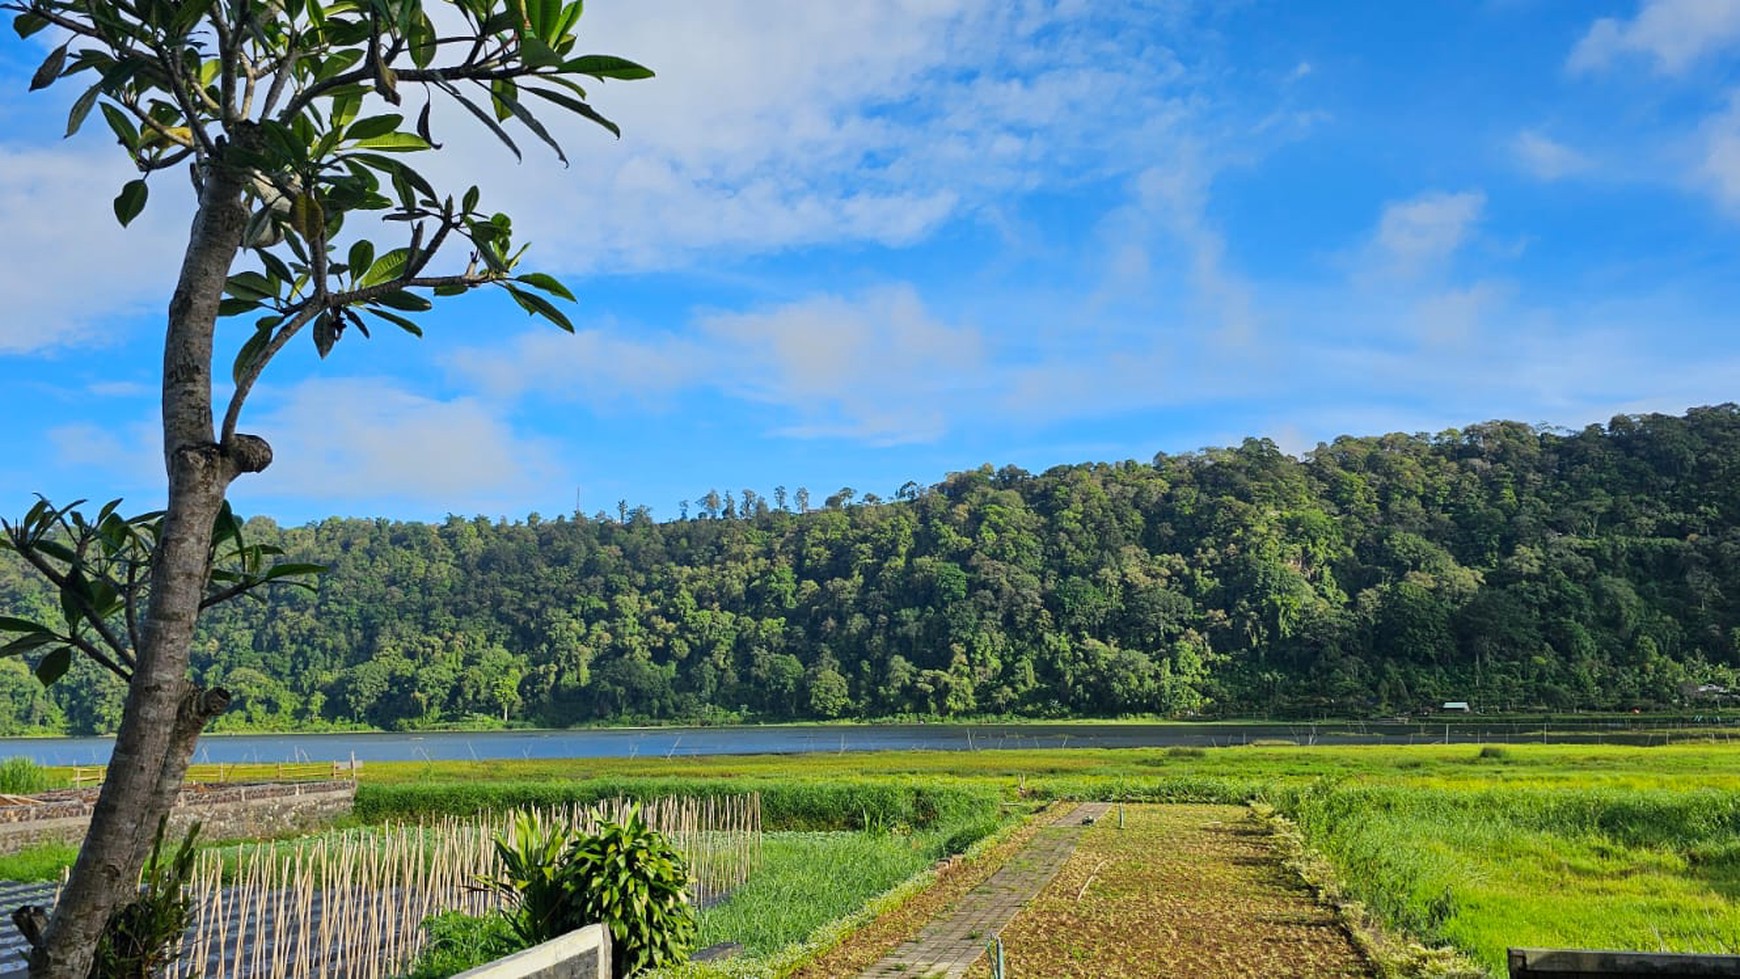 Lakeside Luxury situated next to Bali Handara Golf: Experience Absolute Tranquility at Gatsby on Buyan, Bali